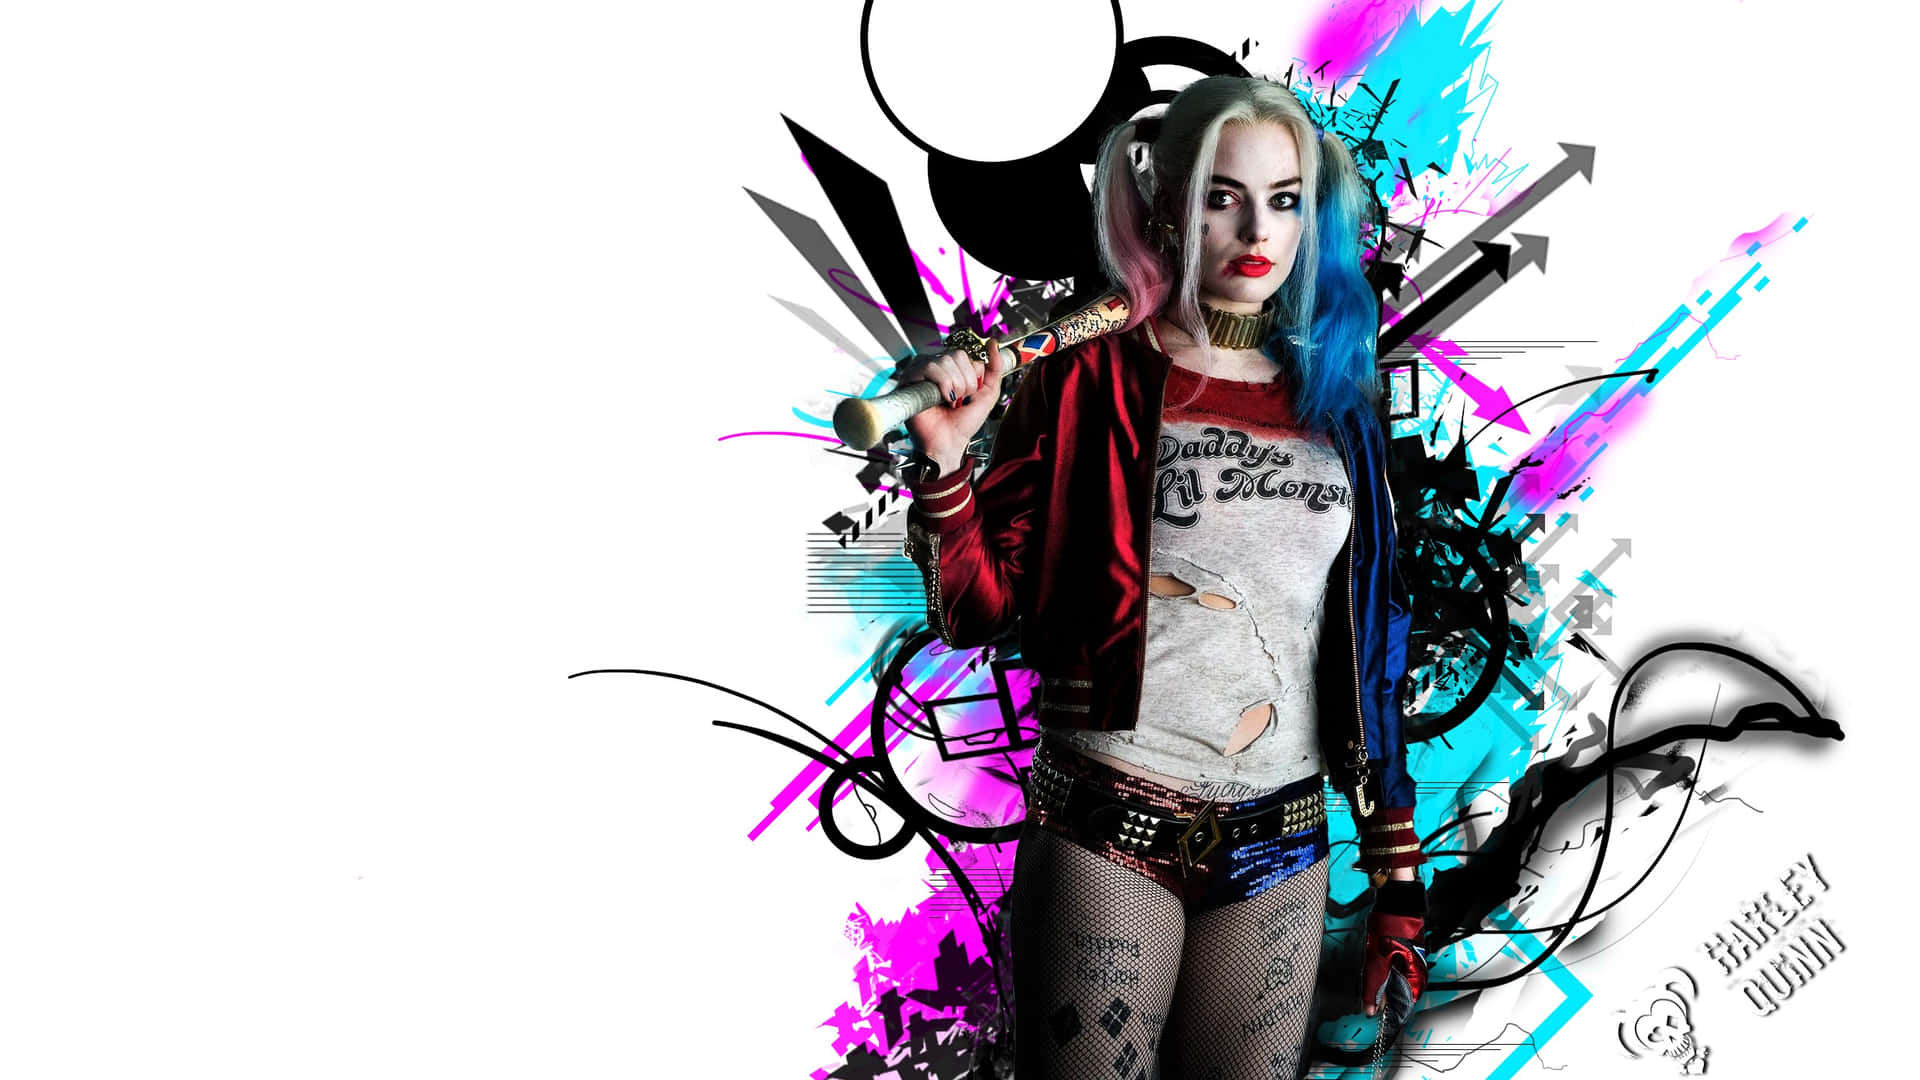 The Love Between Joker And Harley Quinn From Suicide Squad. Wallpaper